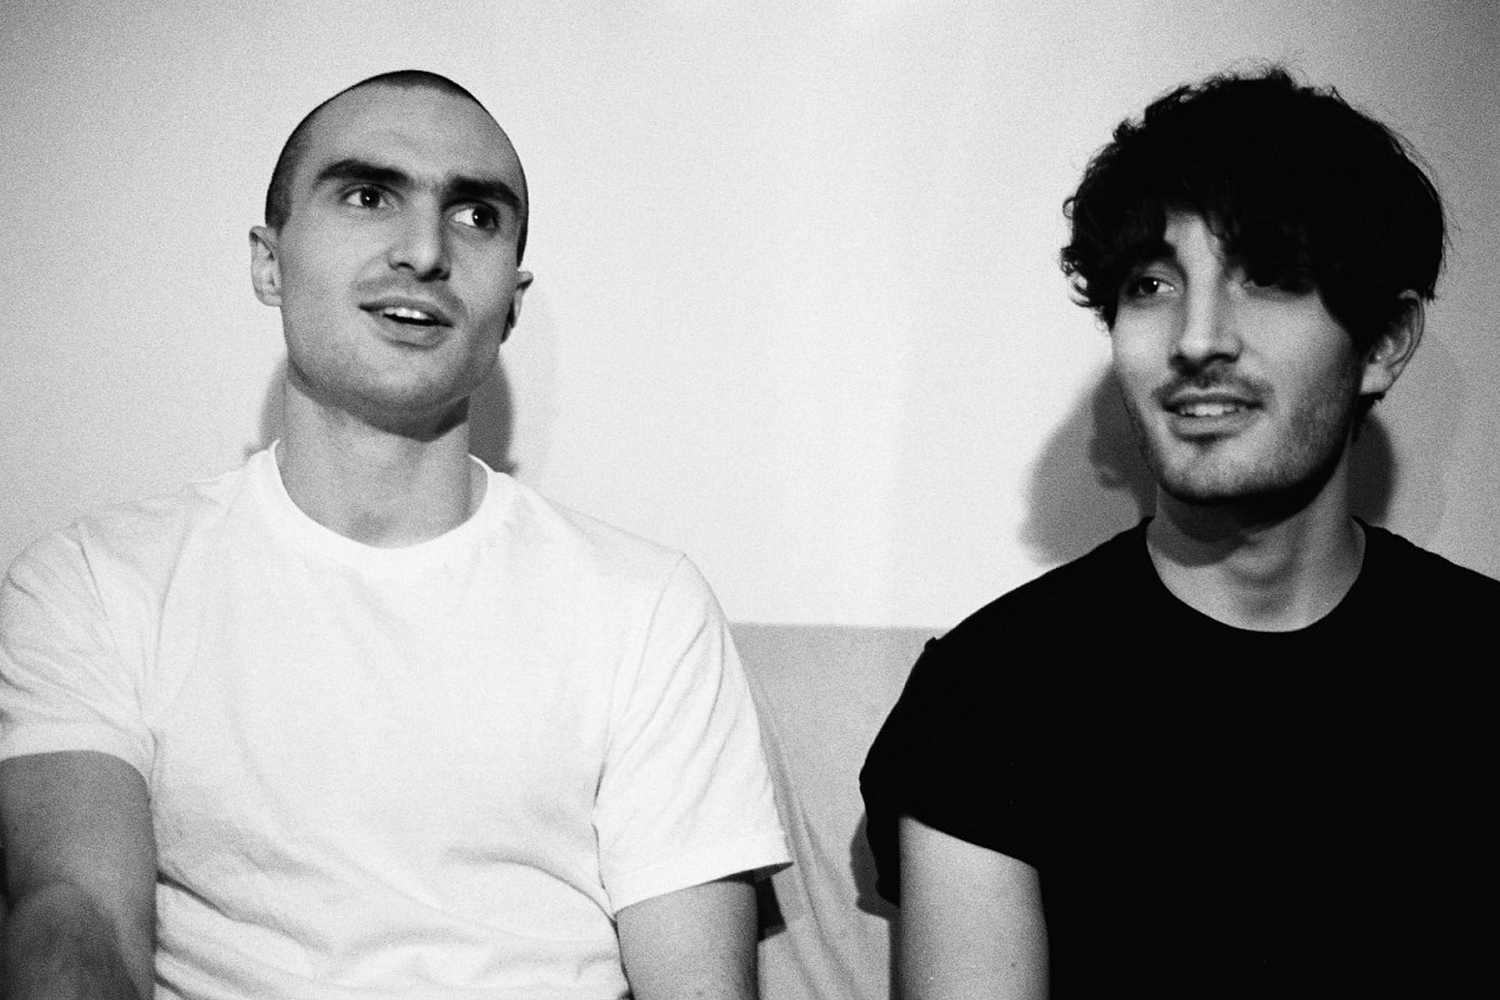 Majical Cloudz: "I love music and will never stop making it, because it brings me joy"